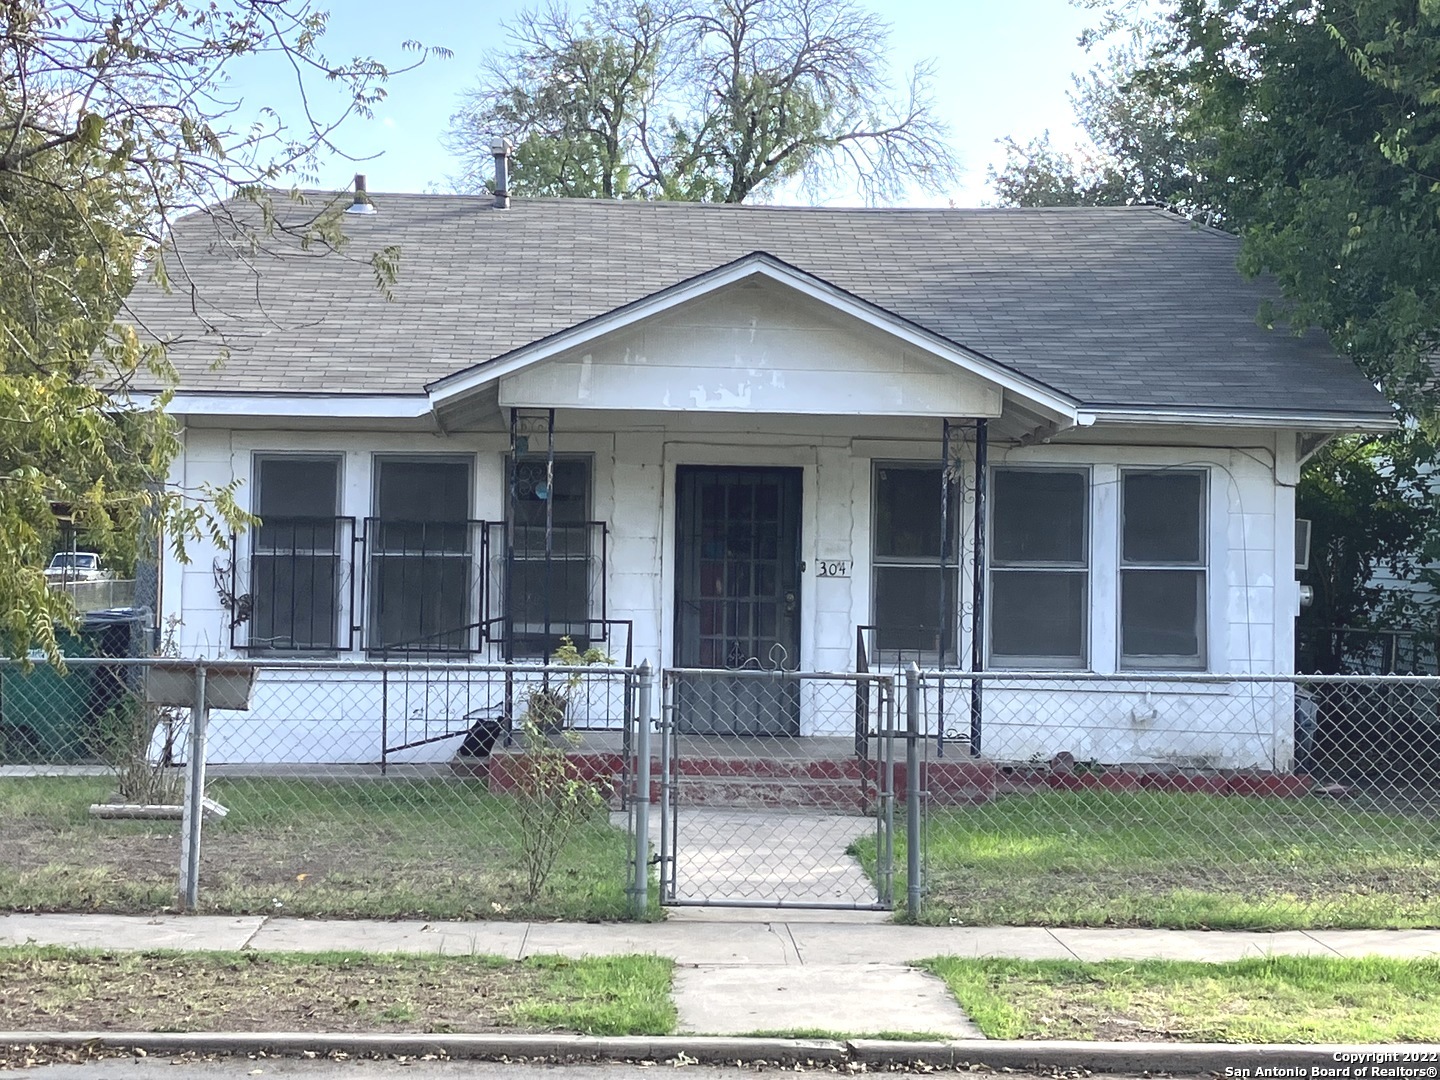 THIS IS A FIXER UPPER HOME ON A HUGE .25 OF AN ACRE. SERIOUS INQUIRIES ONLY.  NEAR SAN ANTONIO MISSIONS HISTORICAL PARK, RIVERSIDE GOLF COURSE.